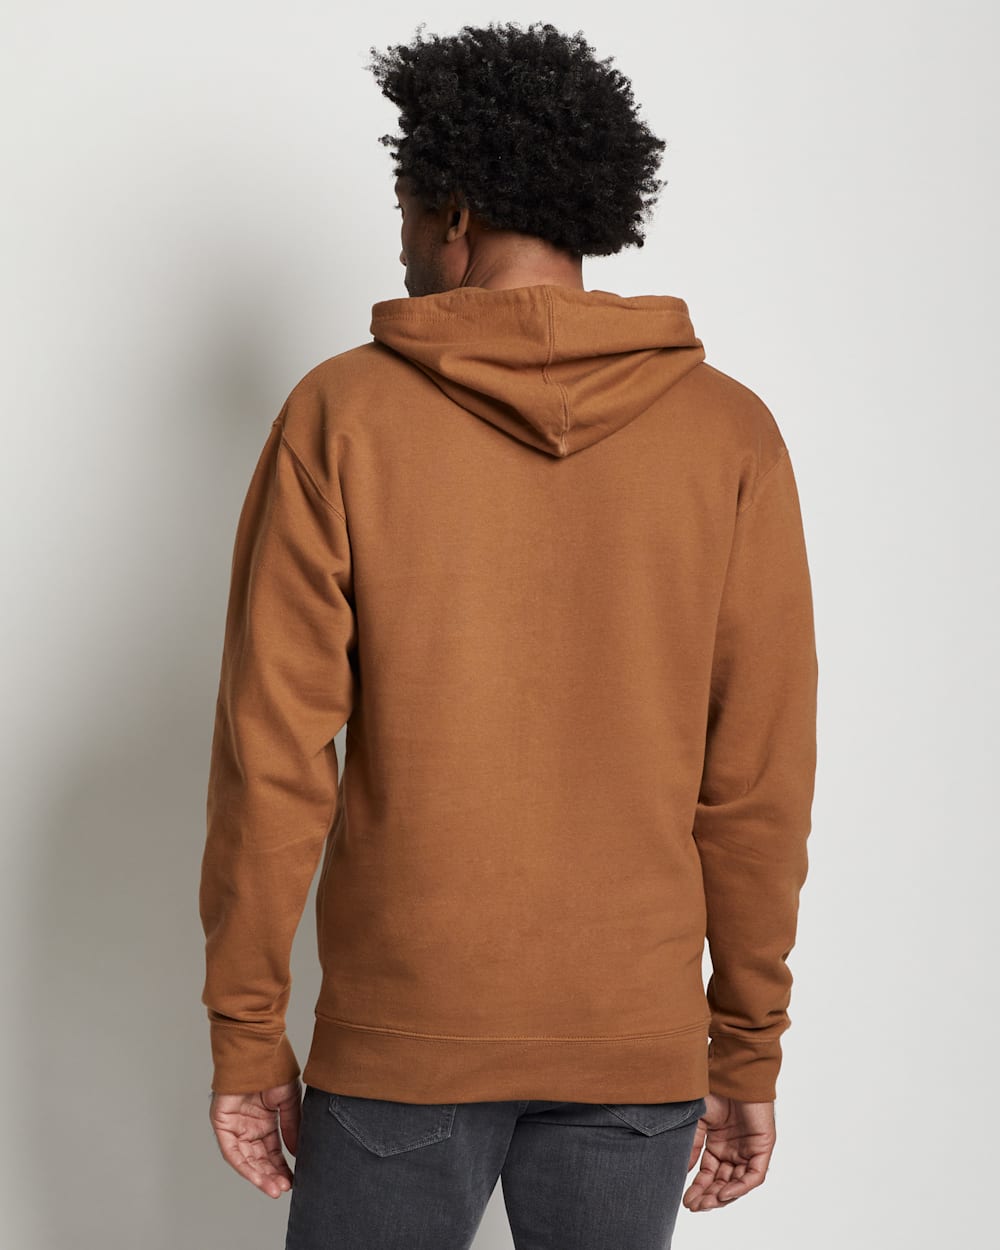 ALTERNATE VIEW OF UNISEX HERITAGE RODEO HOODIE IN SADDLE/GOLD image number 5